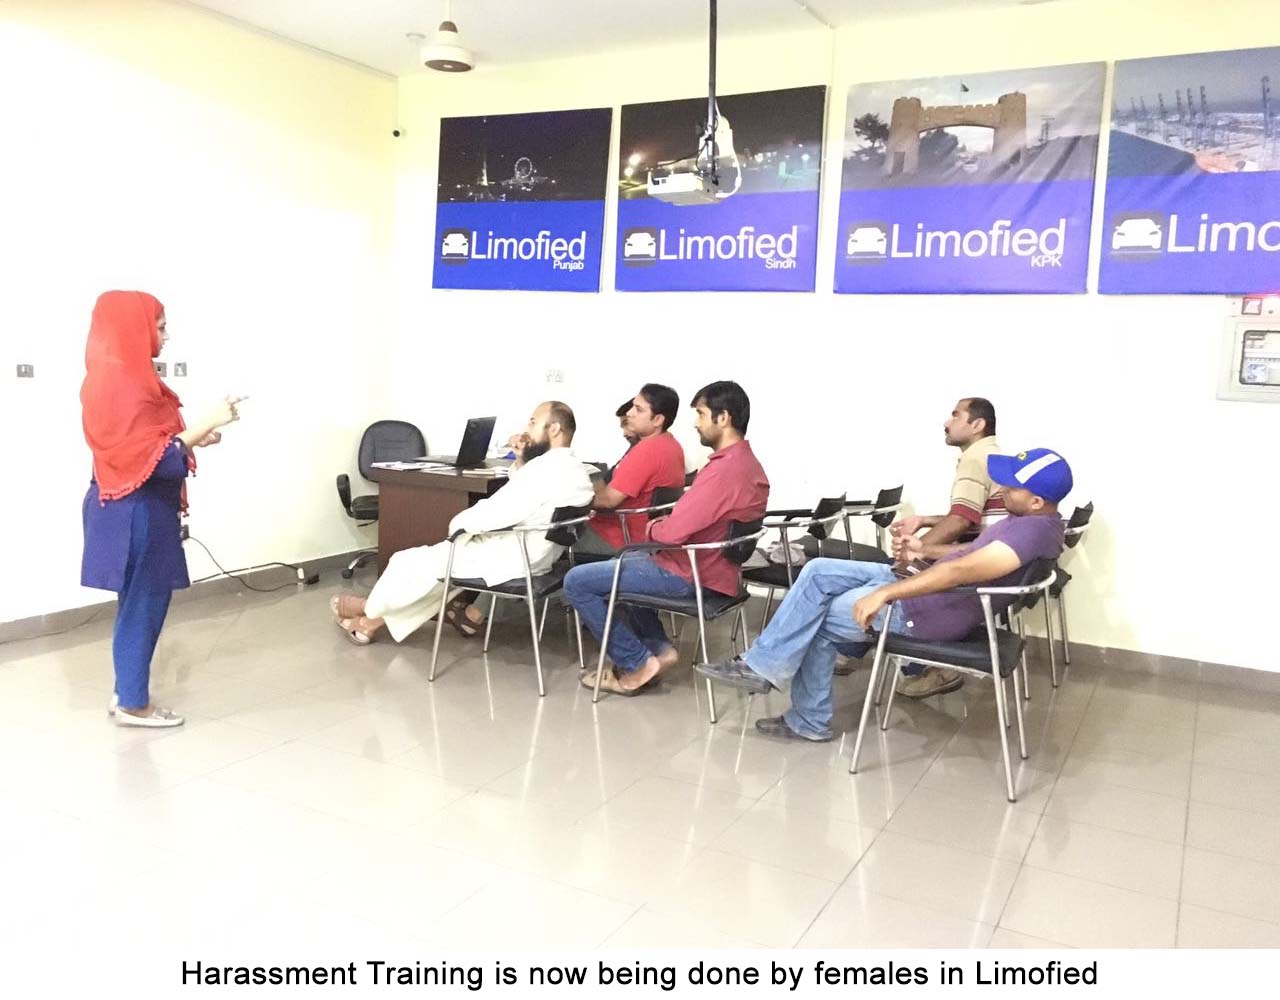 Limofied has heard the complaints from the riders of Pakistan about captains canceling the rides and mounting the debt on the riders’ app account.